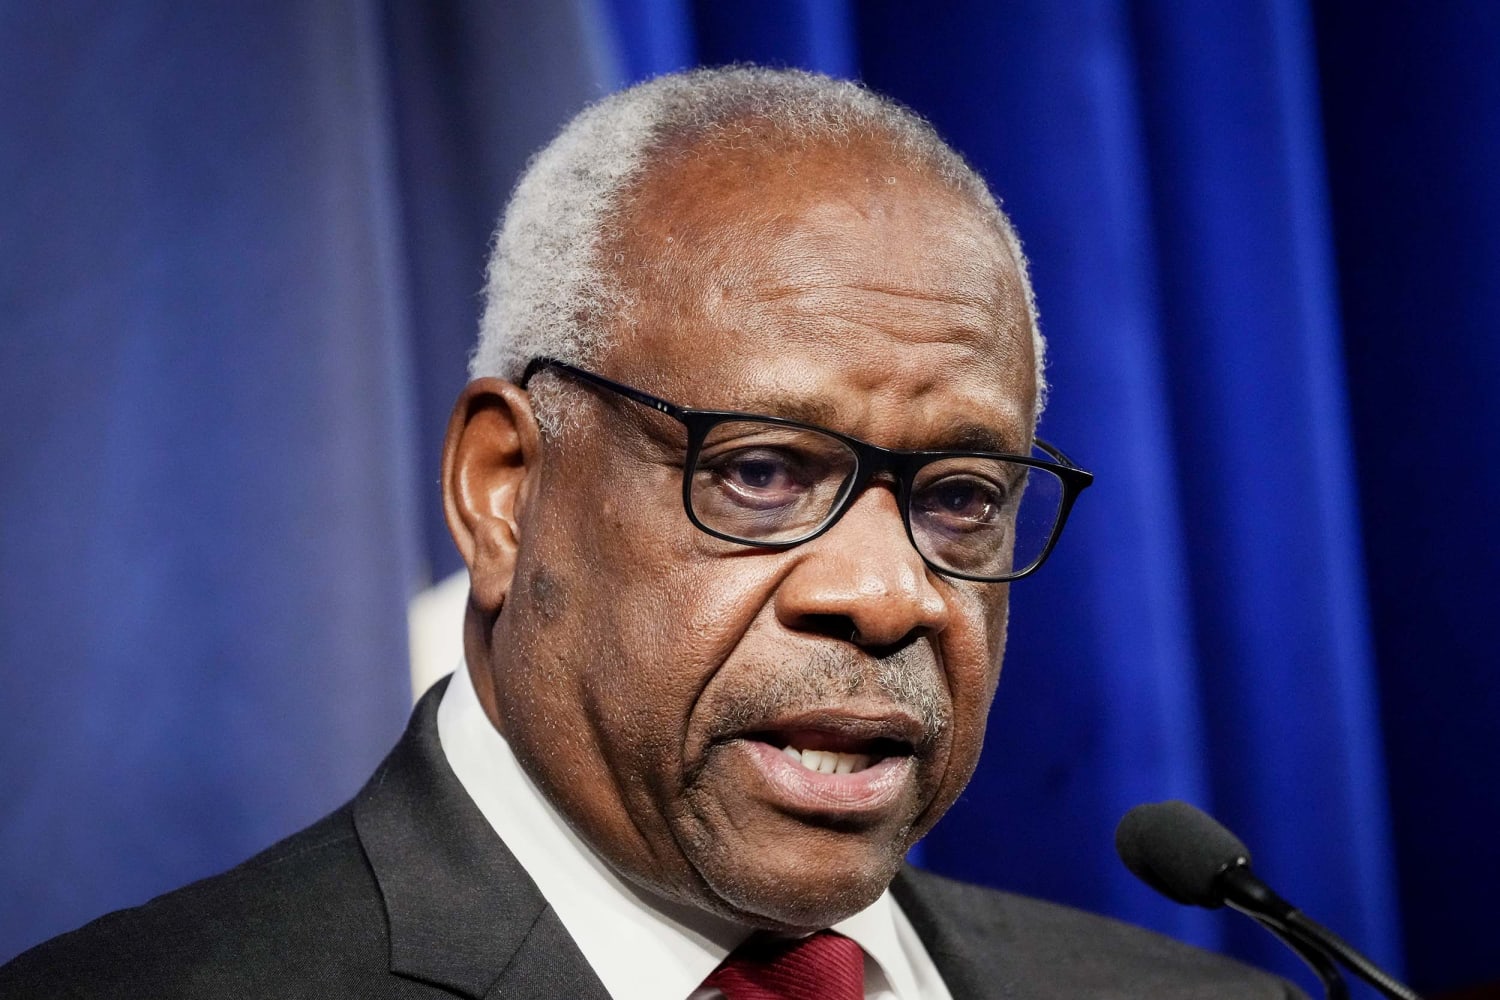 Clarence Thomas cites misleading claim about Covid vaccines